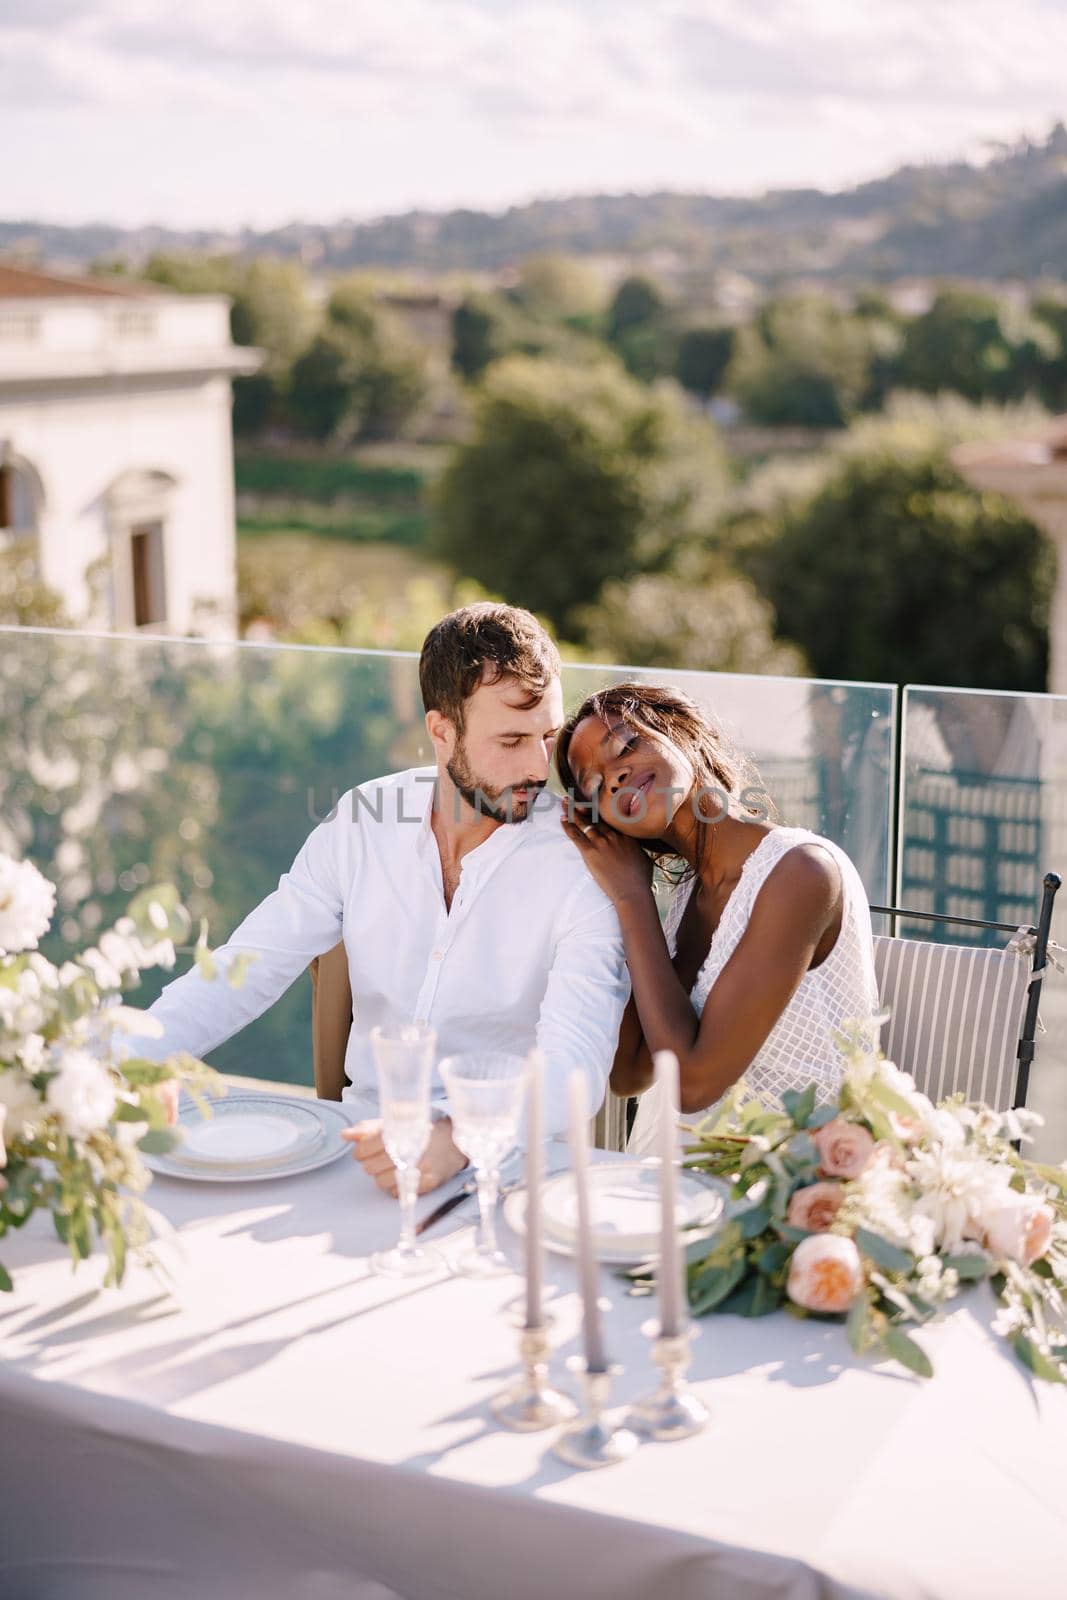 Destination fine-art wedding in Florence, Italy. African-American bride and Caucasian groom are sitting at the rooftop wedding dinner table overlooking the city. Multiracial wedding couple by Nadtochiy